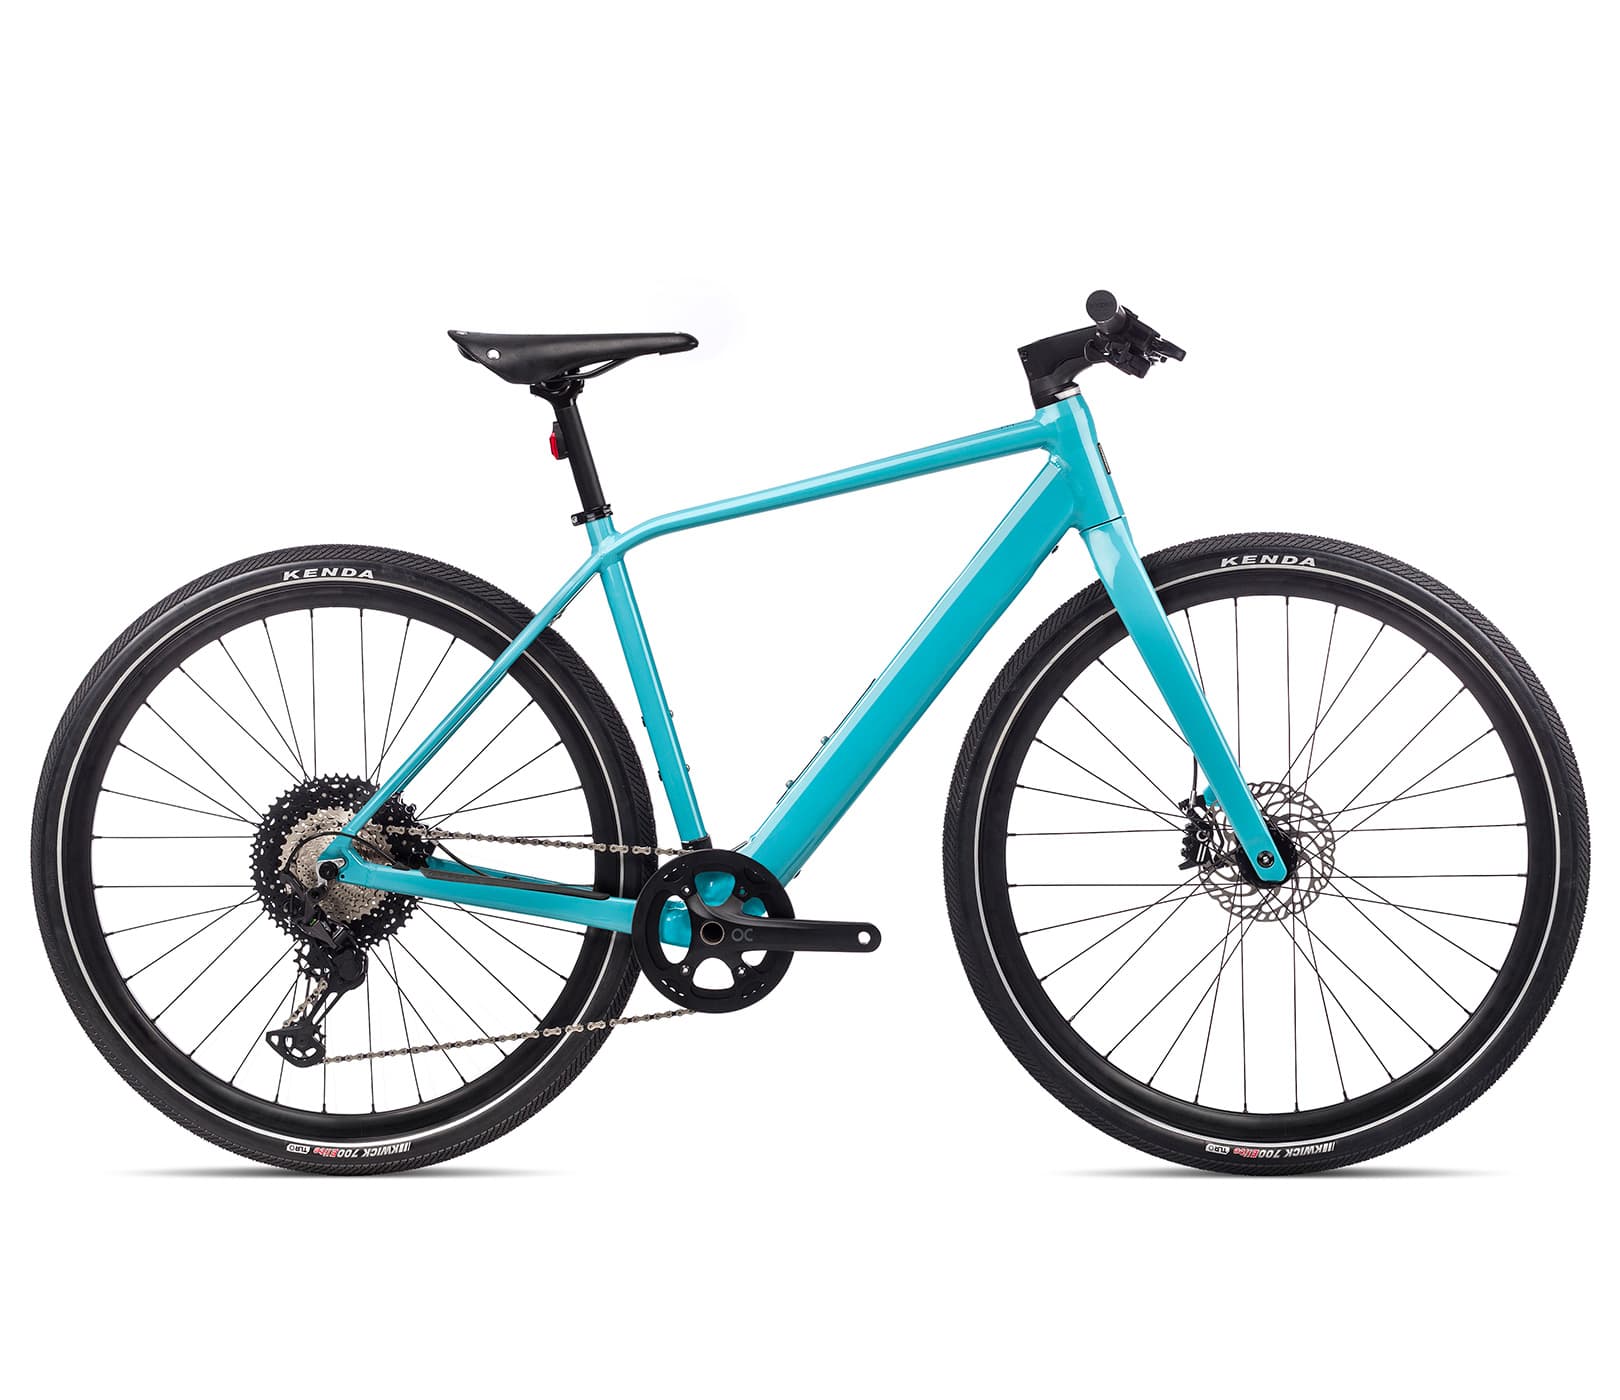 Orbea Vibe H10 Spec Review - 2021 